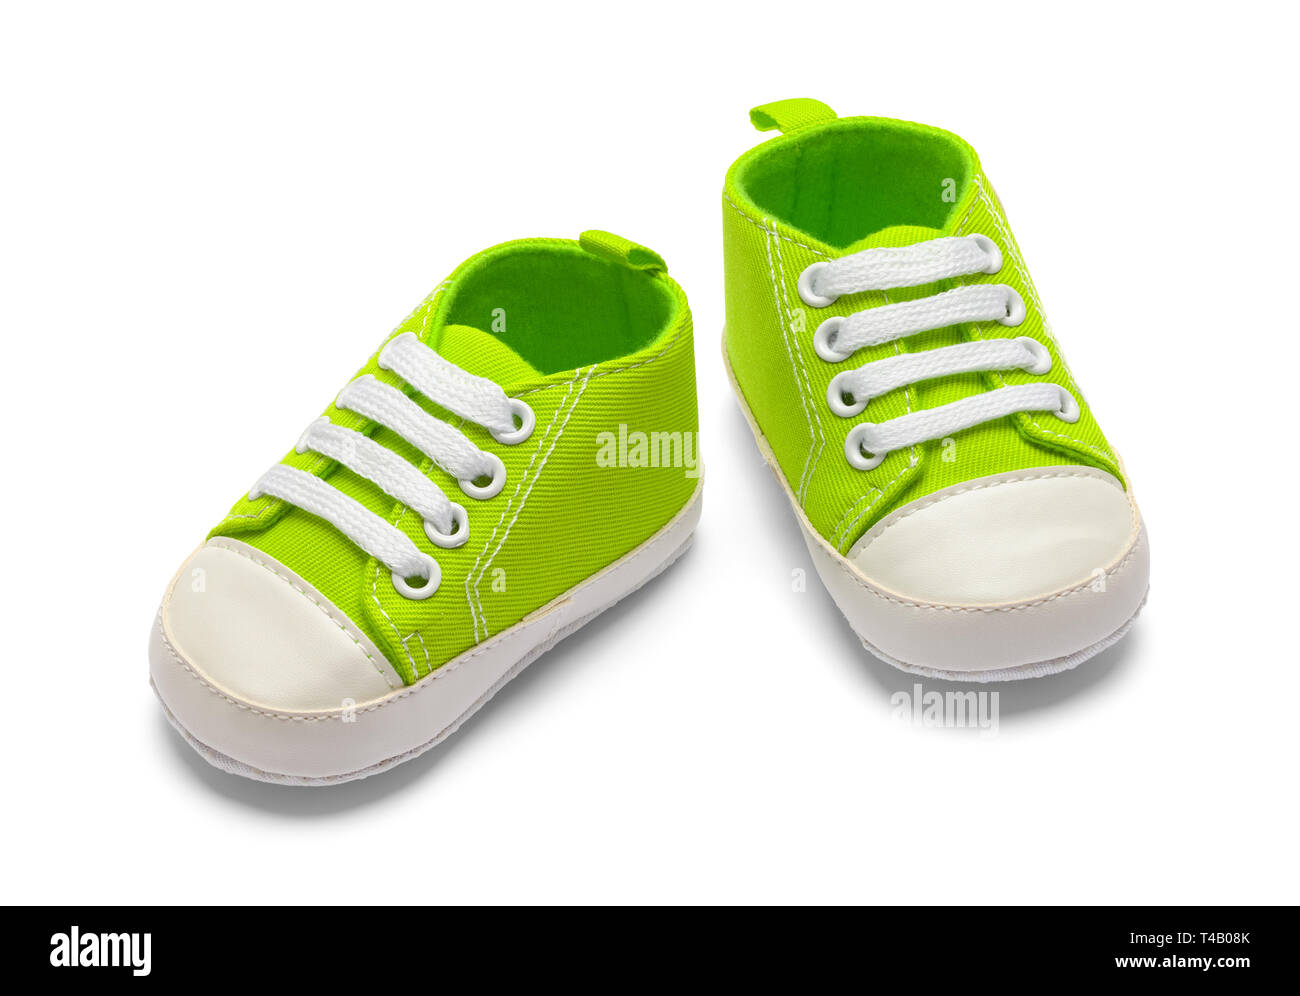 Pair Of Green Baby Shoes Isolated on White Backround. Stock Photo